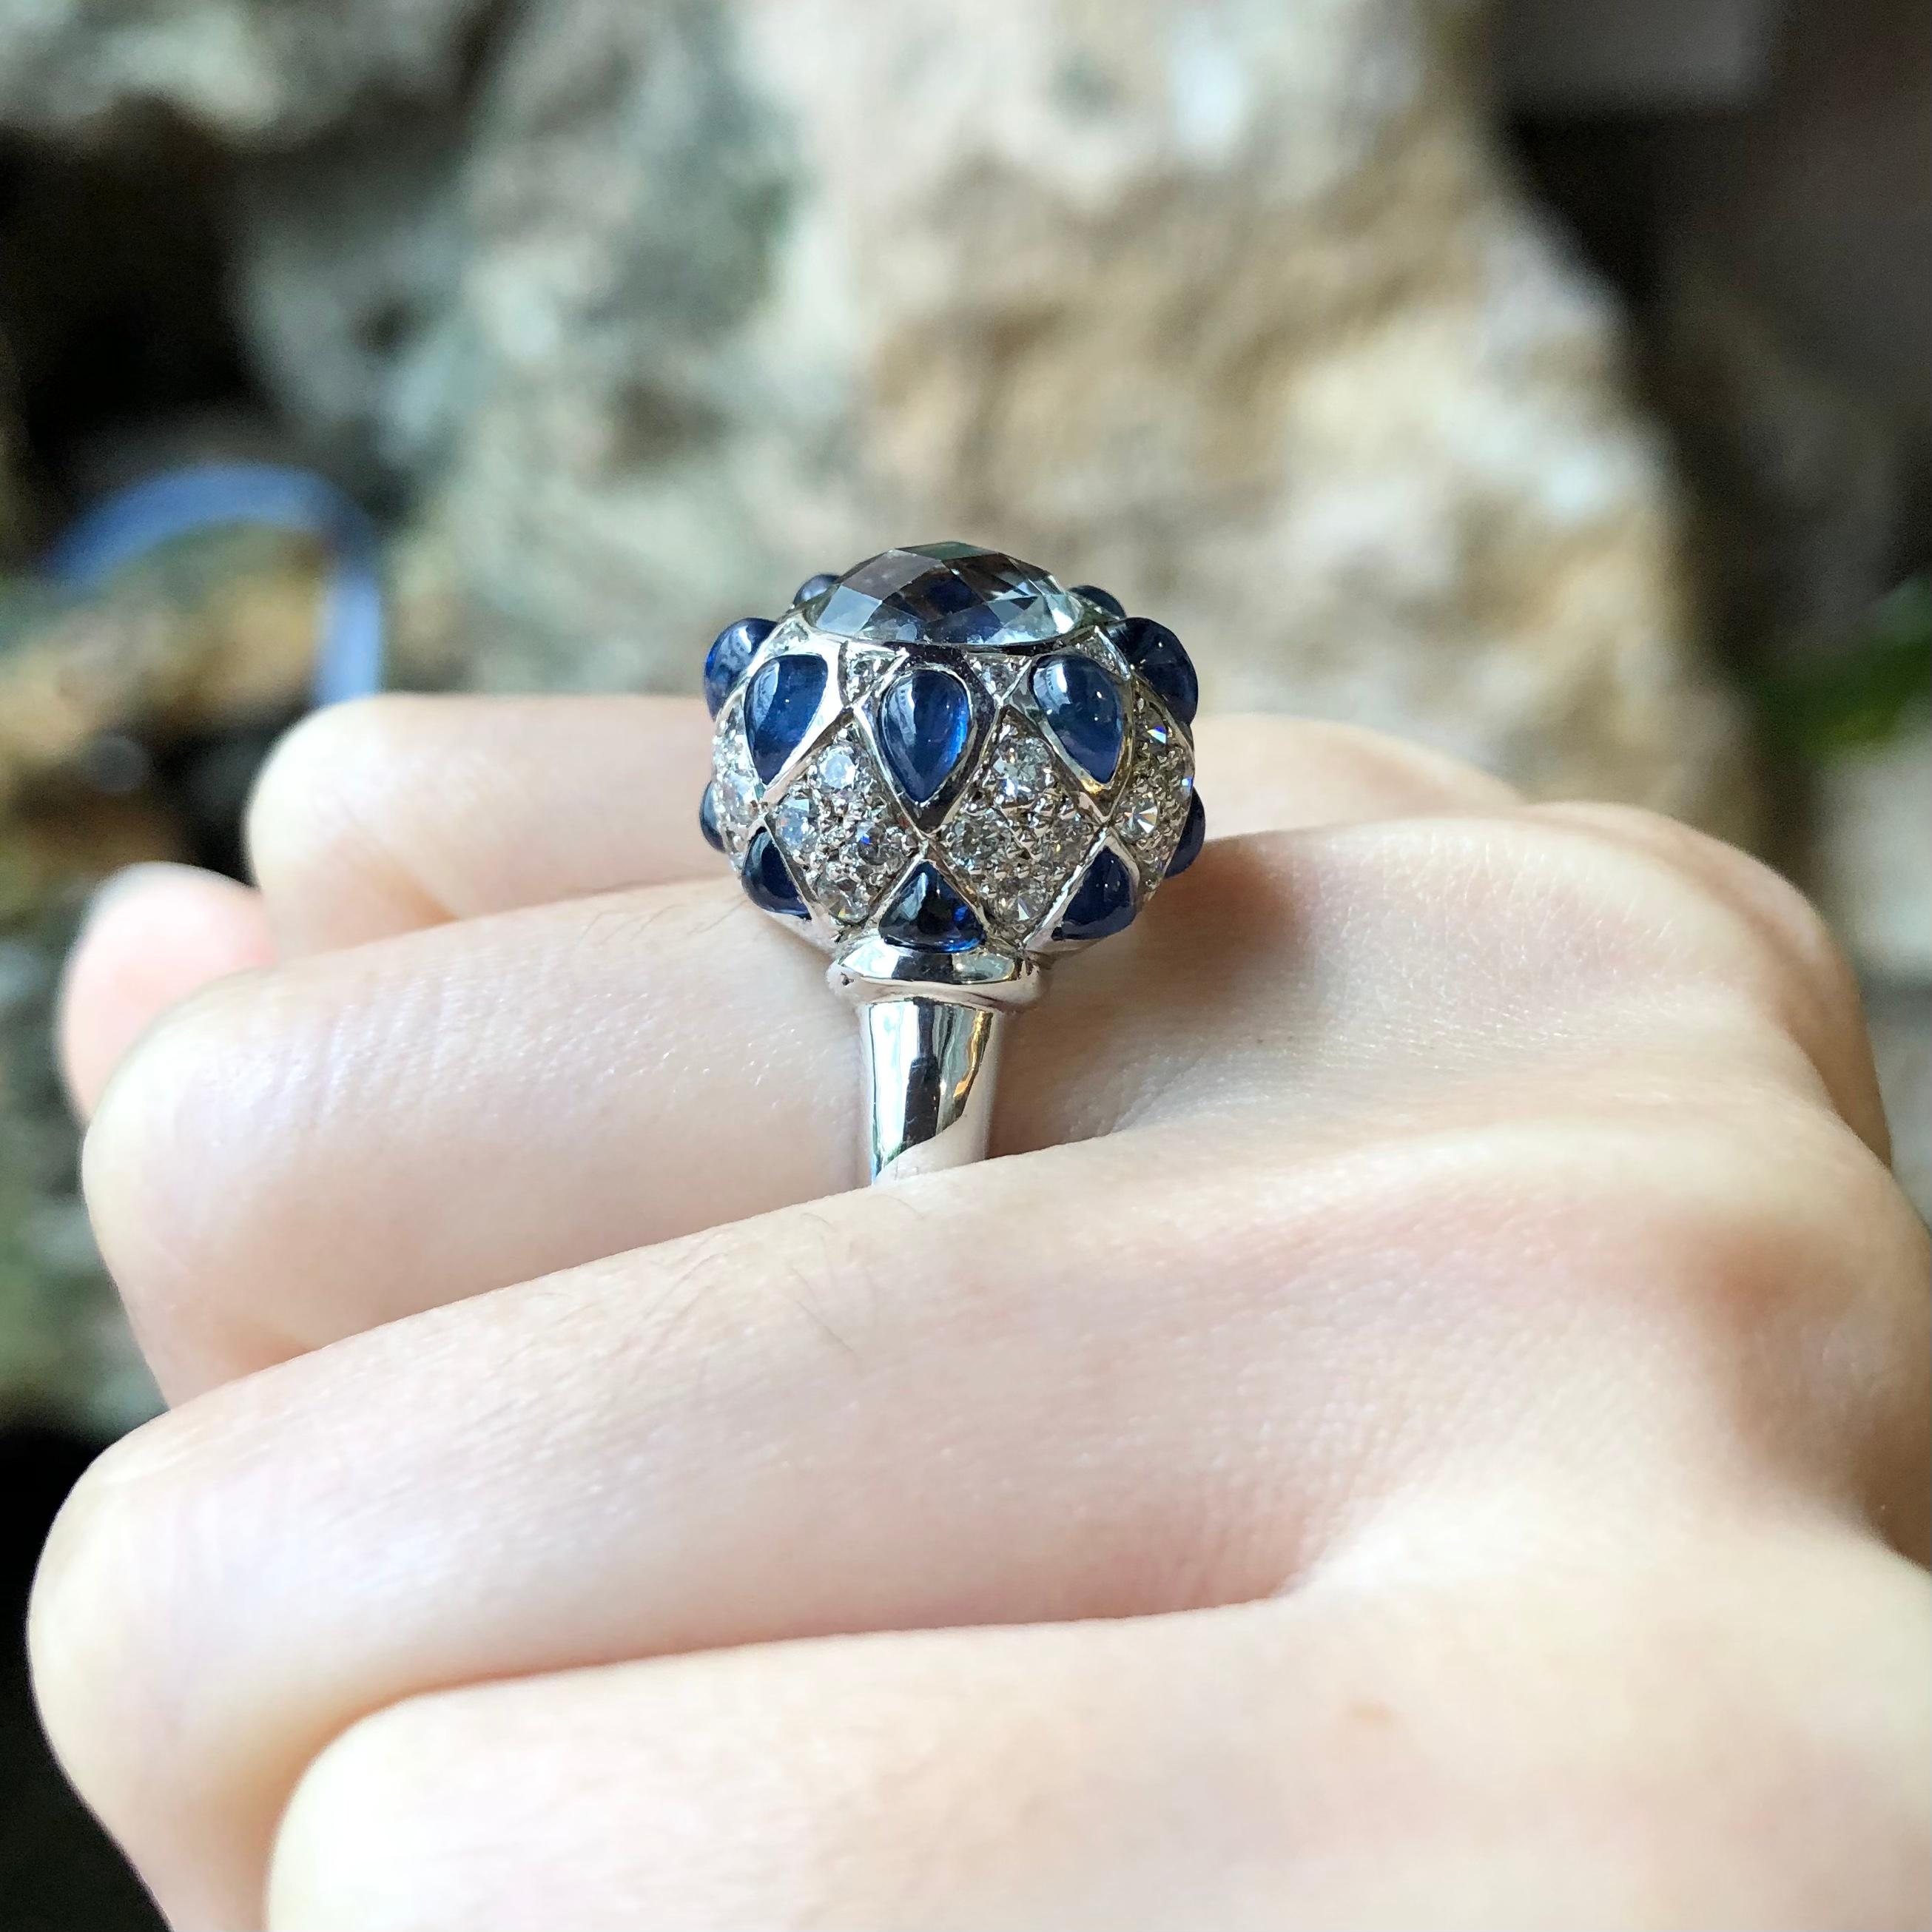 White Topaz, Cabochon Blue Sapphire with Cubic Zirconia Ring set in Silver Settings

Width:  1.7 cm 
Length: 1.7 cm
Ring Size: 58
Total Weight: 8.98 grams

*Please note that the silver setting is plated with rhodium to promote shine and help prevent